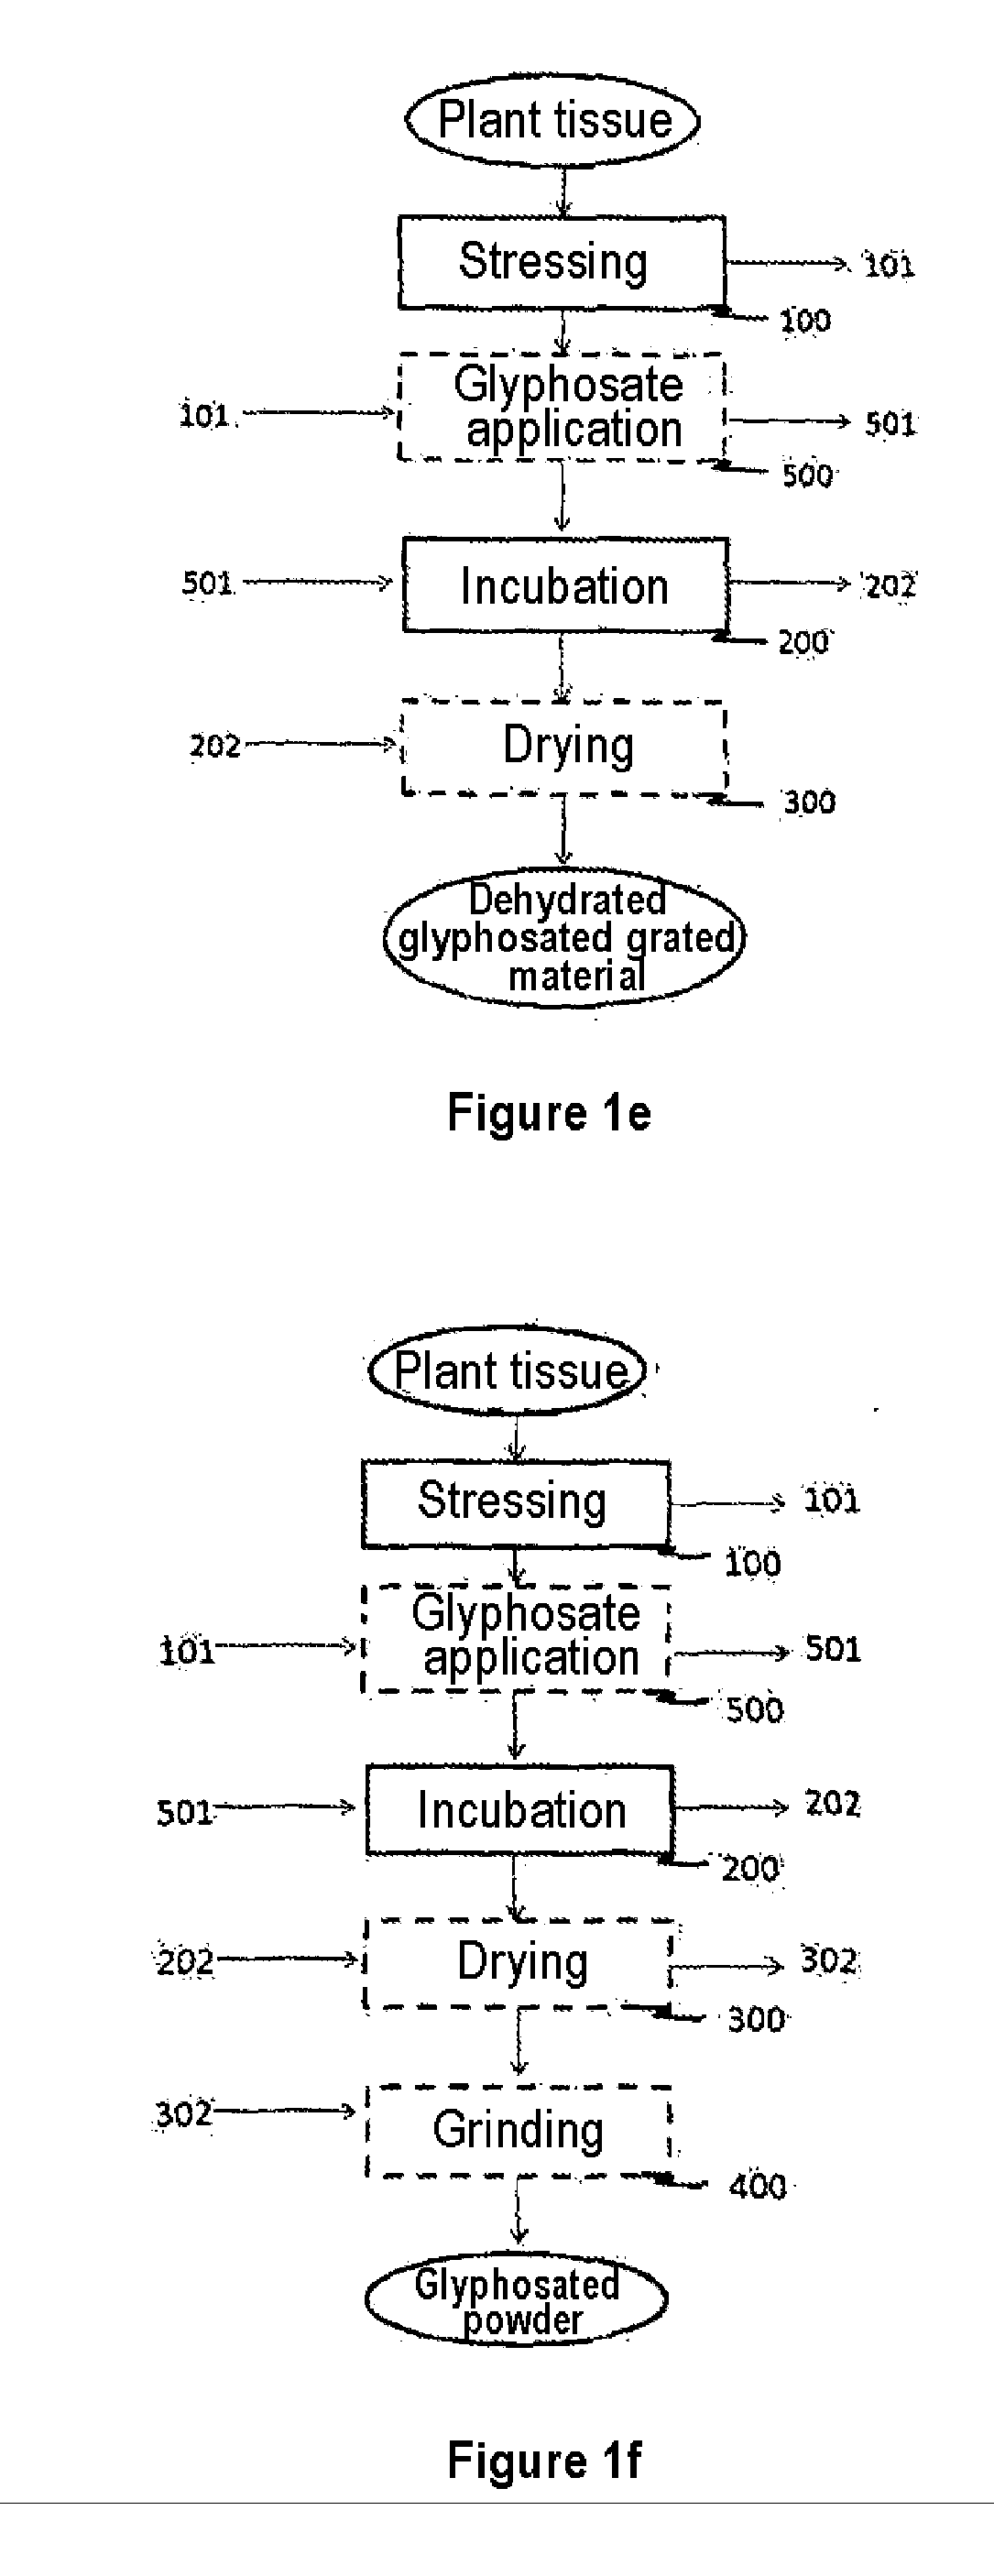 Process for the overproduction of shikimic acid and phenolic acids in fruit and vegetable crops